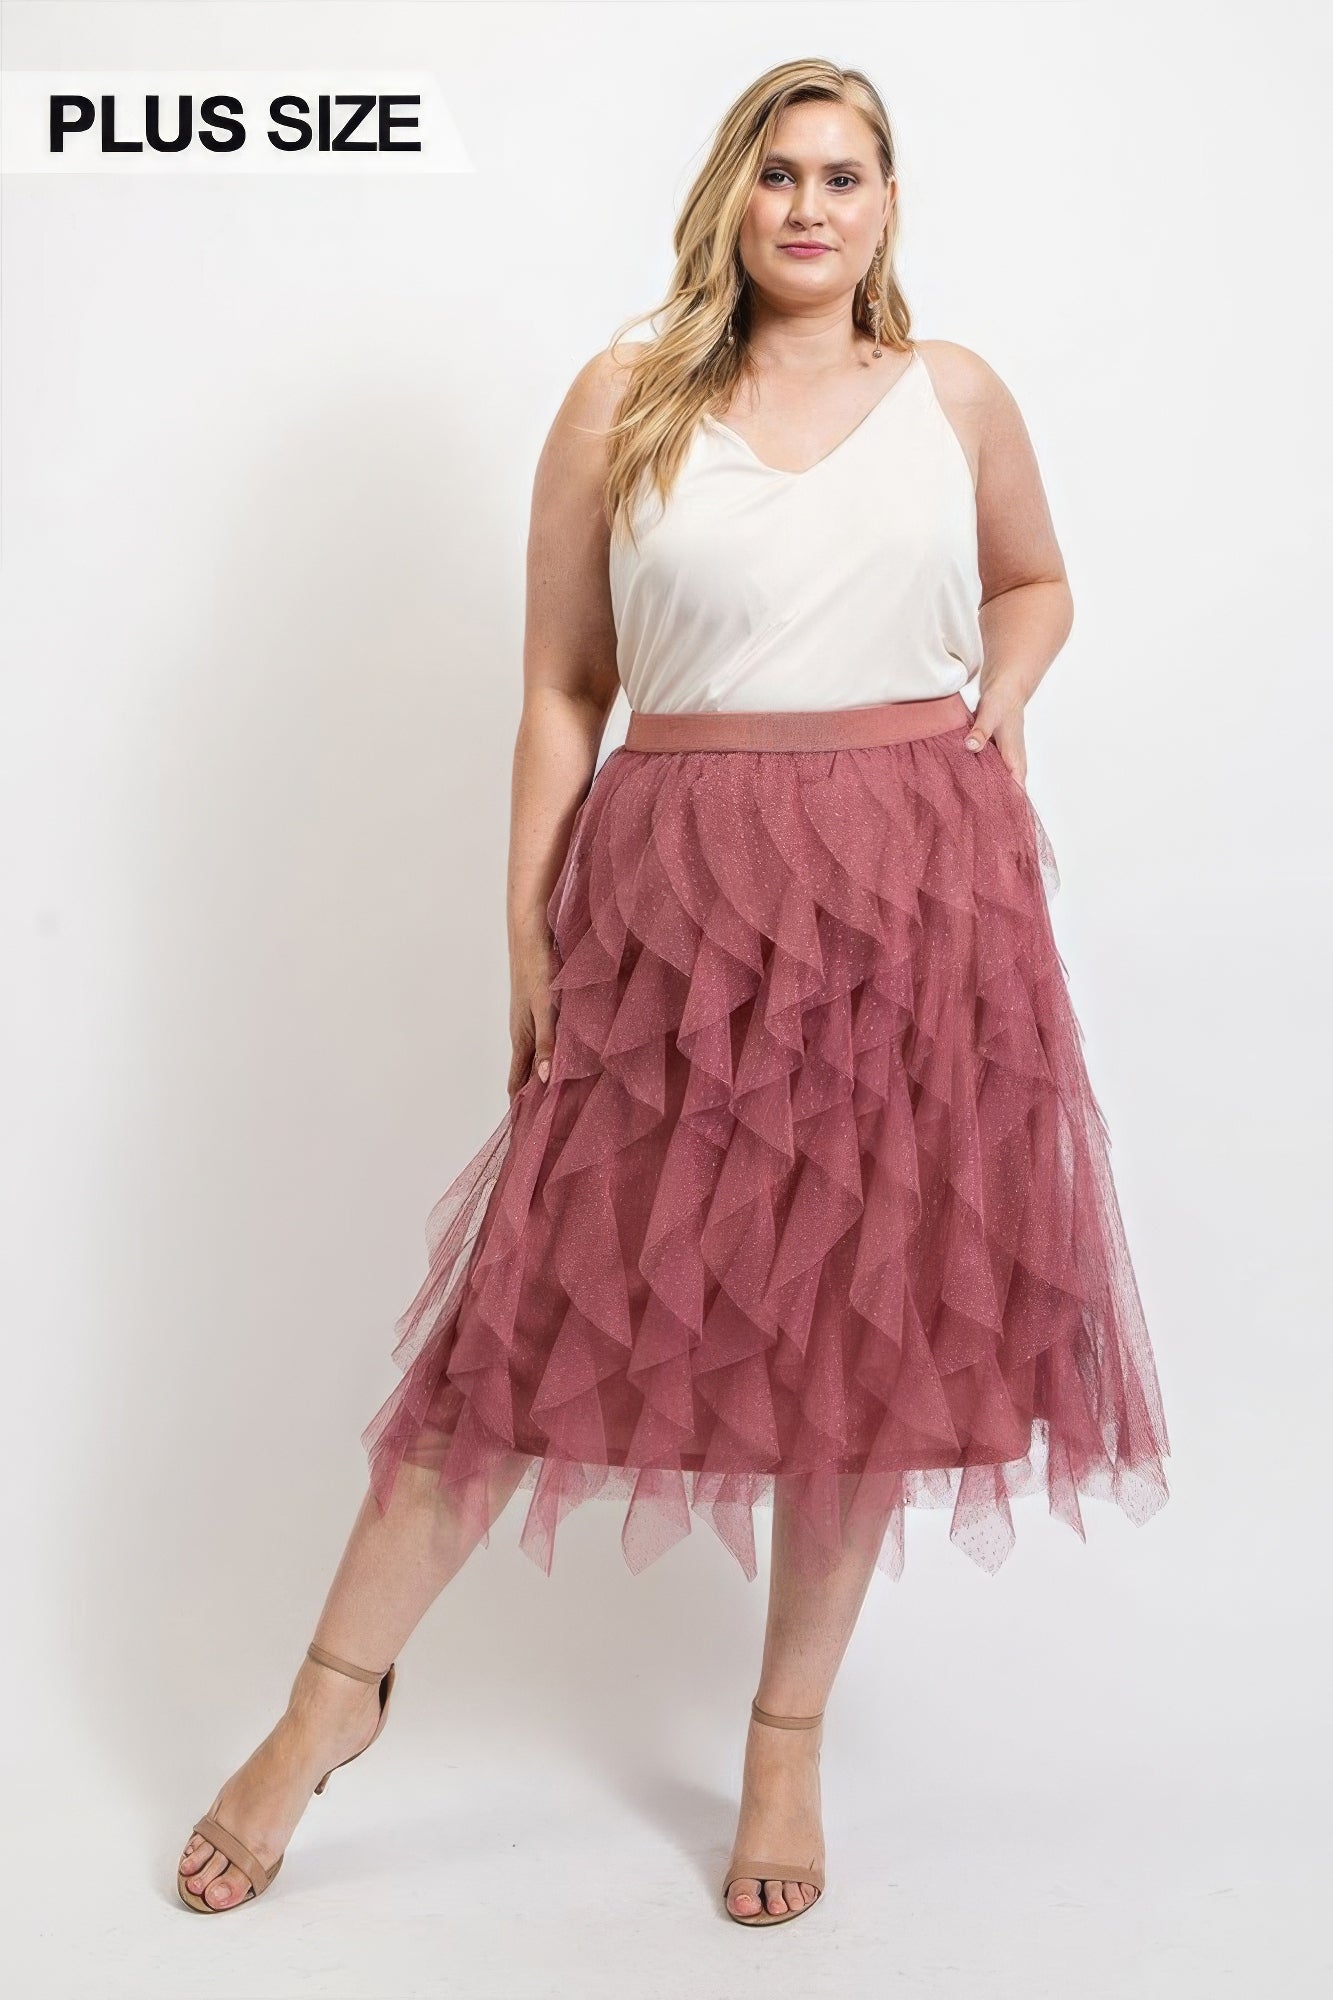 Voluptuous (+) Ruffled Tulle Plus Size Skirt With Elastic Waist Band